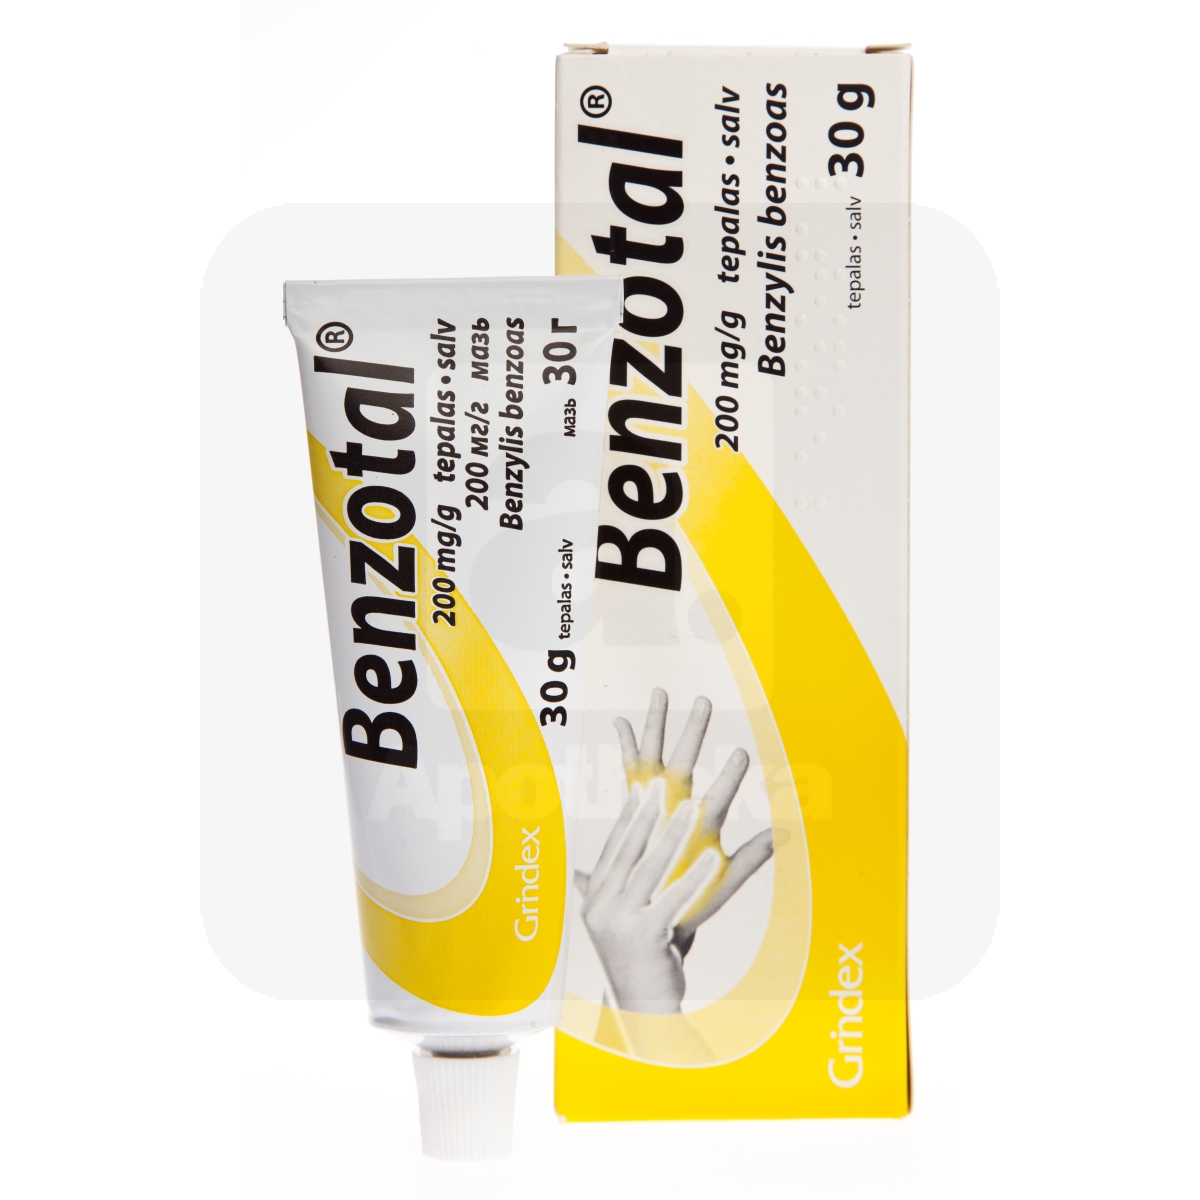 BENZOTAL SALV 200MG/G 30G